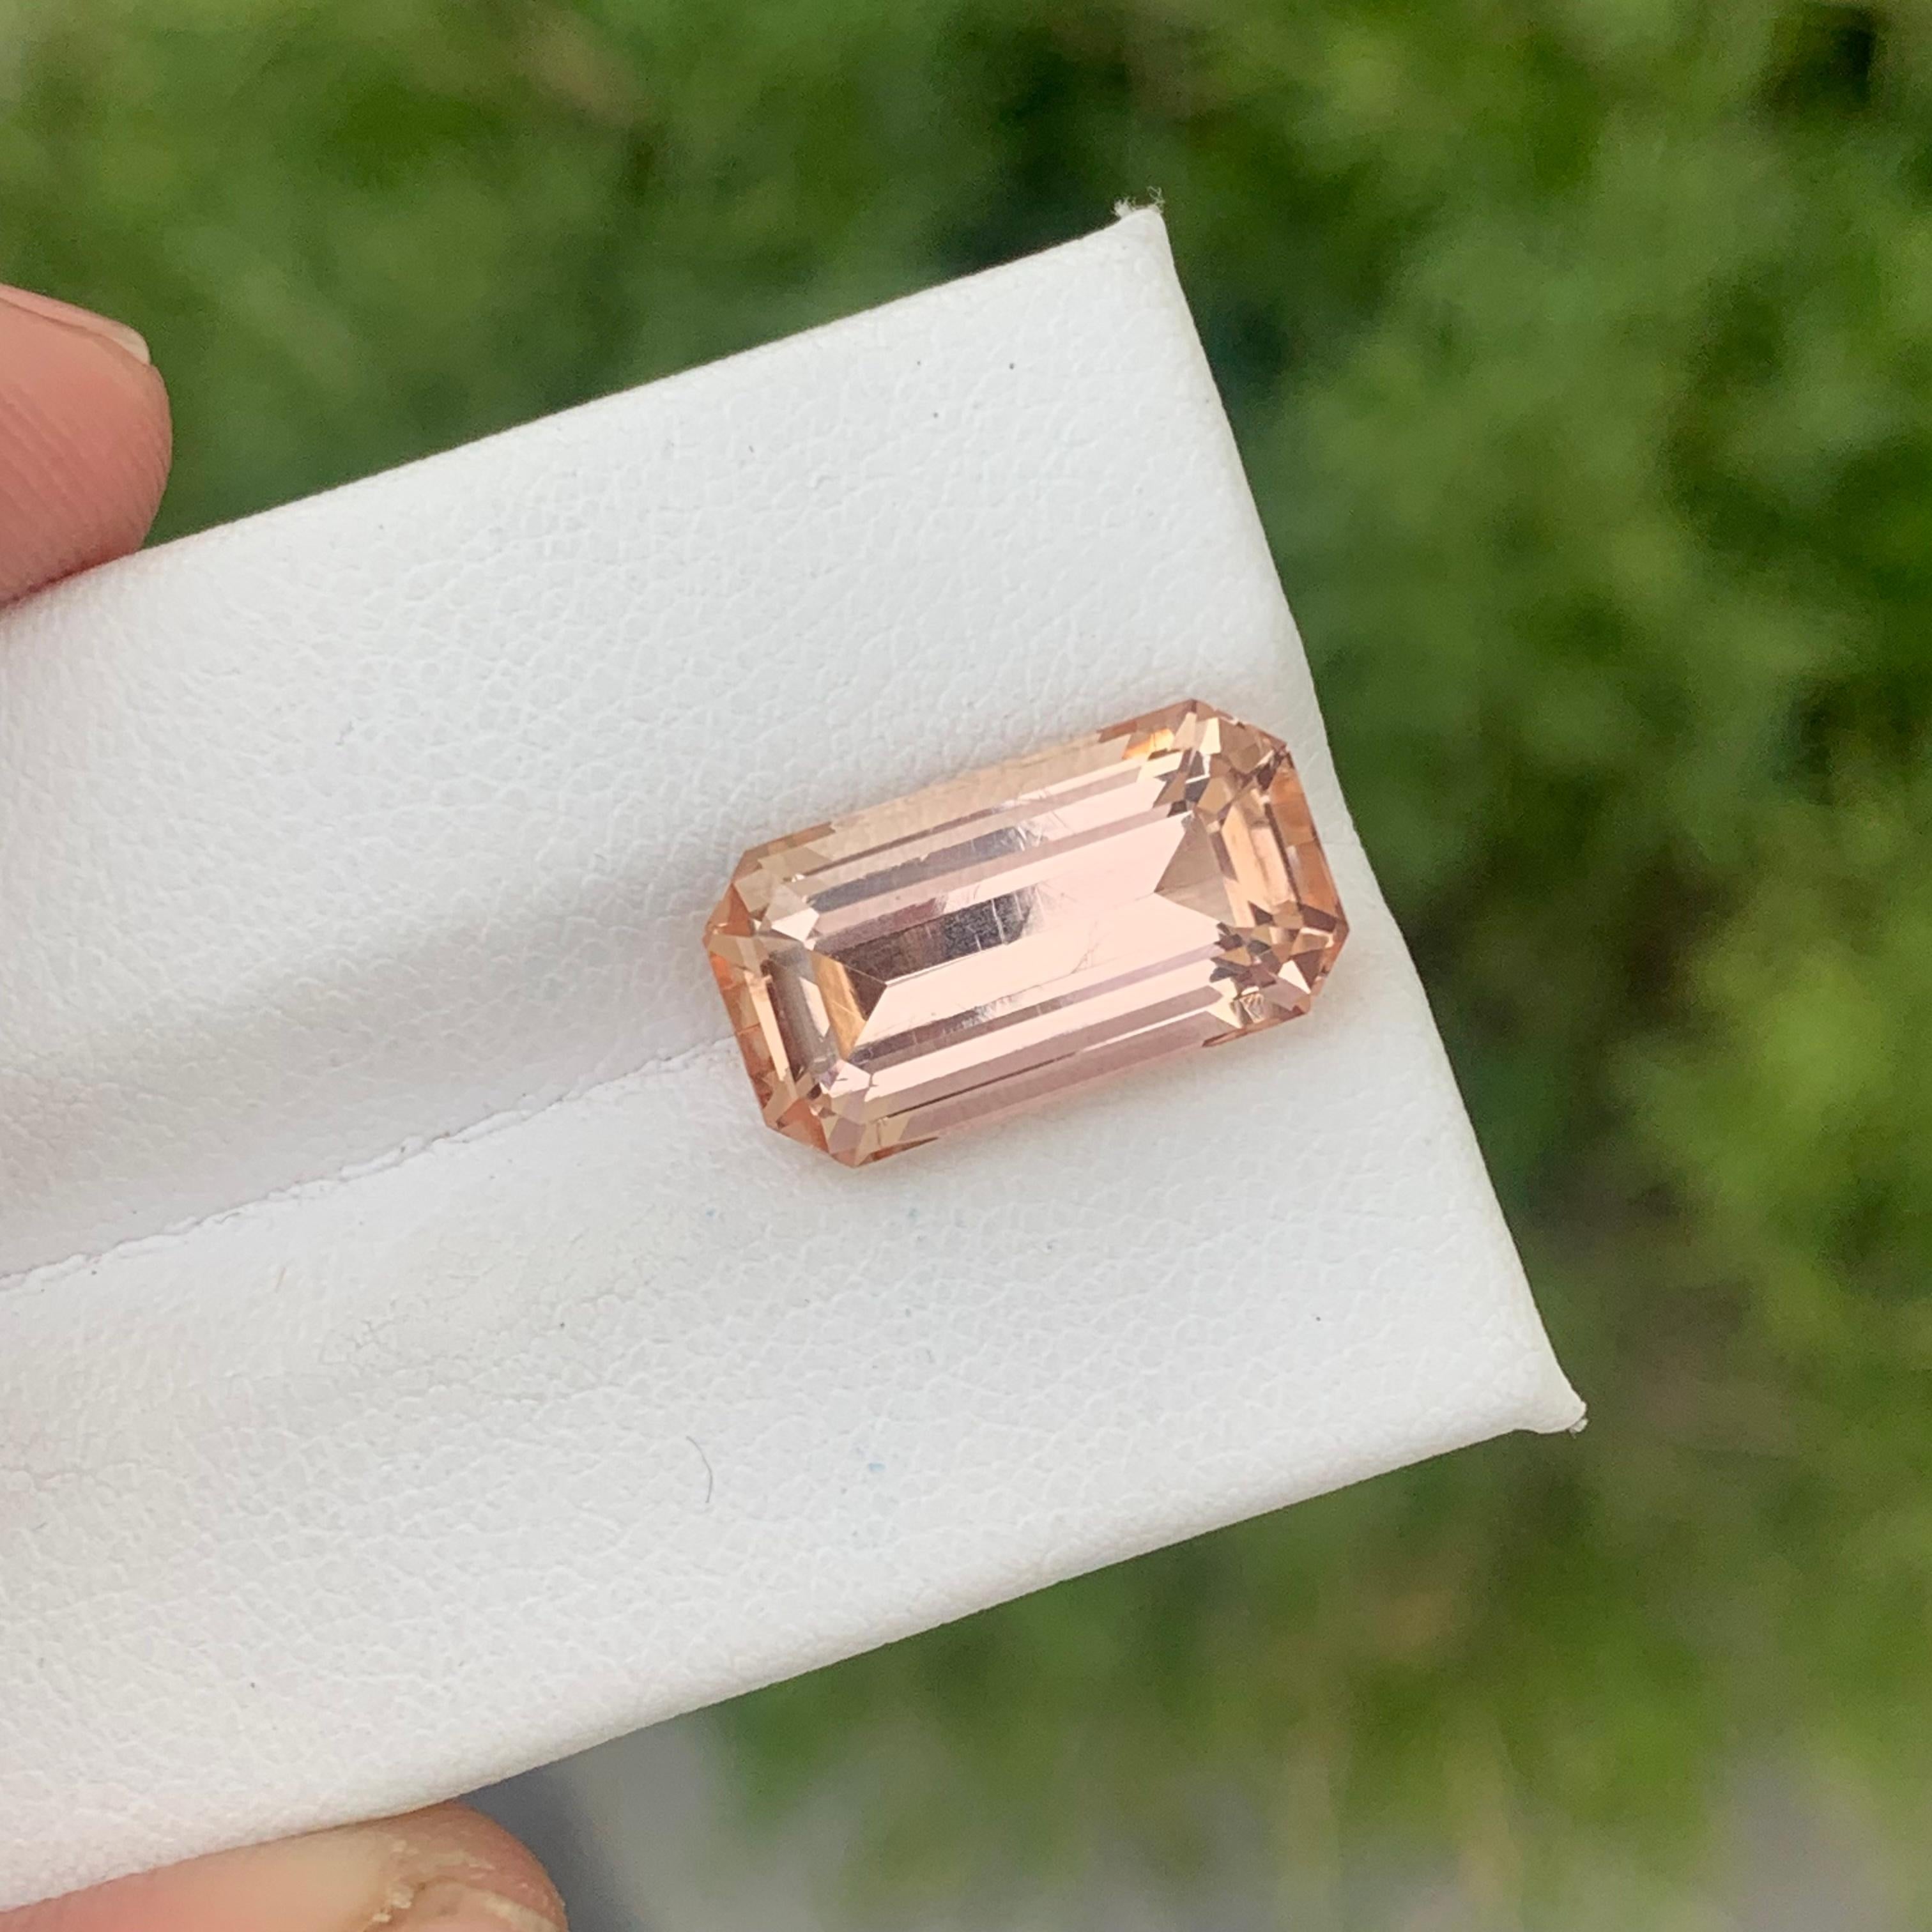 Stunning 10.40 Carat Natural Loose Rare Imperial Topaz From Katlang Pakistan For Sale 2